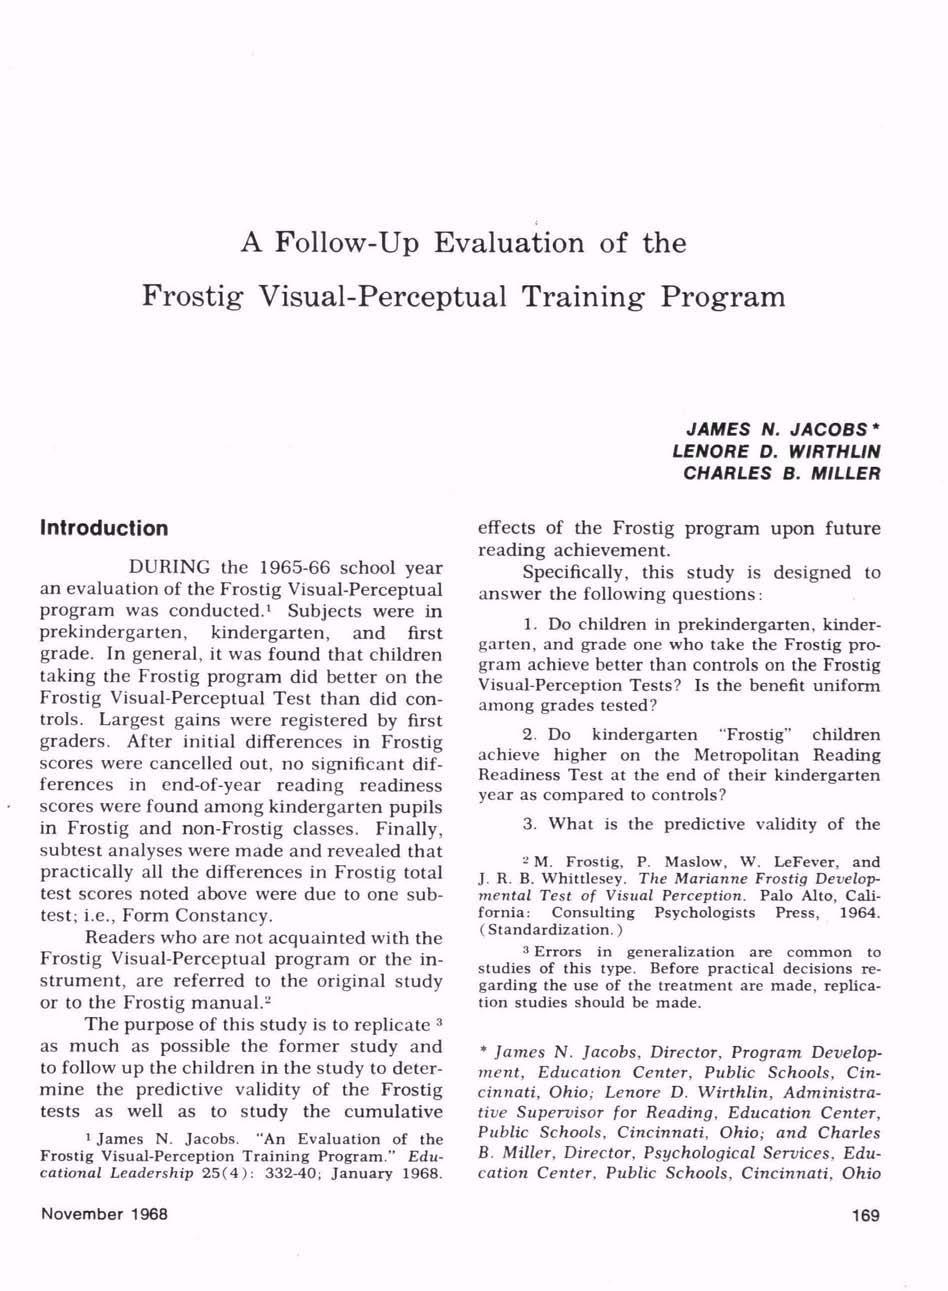 A Follow-Up Evaluation of the Frostig Visual-Perceptual Training Program DURING the 1965-66 school year an evaluation of the Frostig Visual-Perceptual program was conducted.